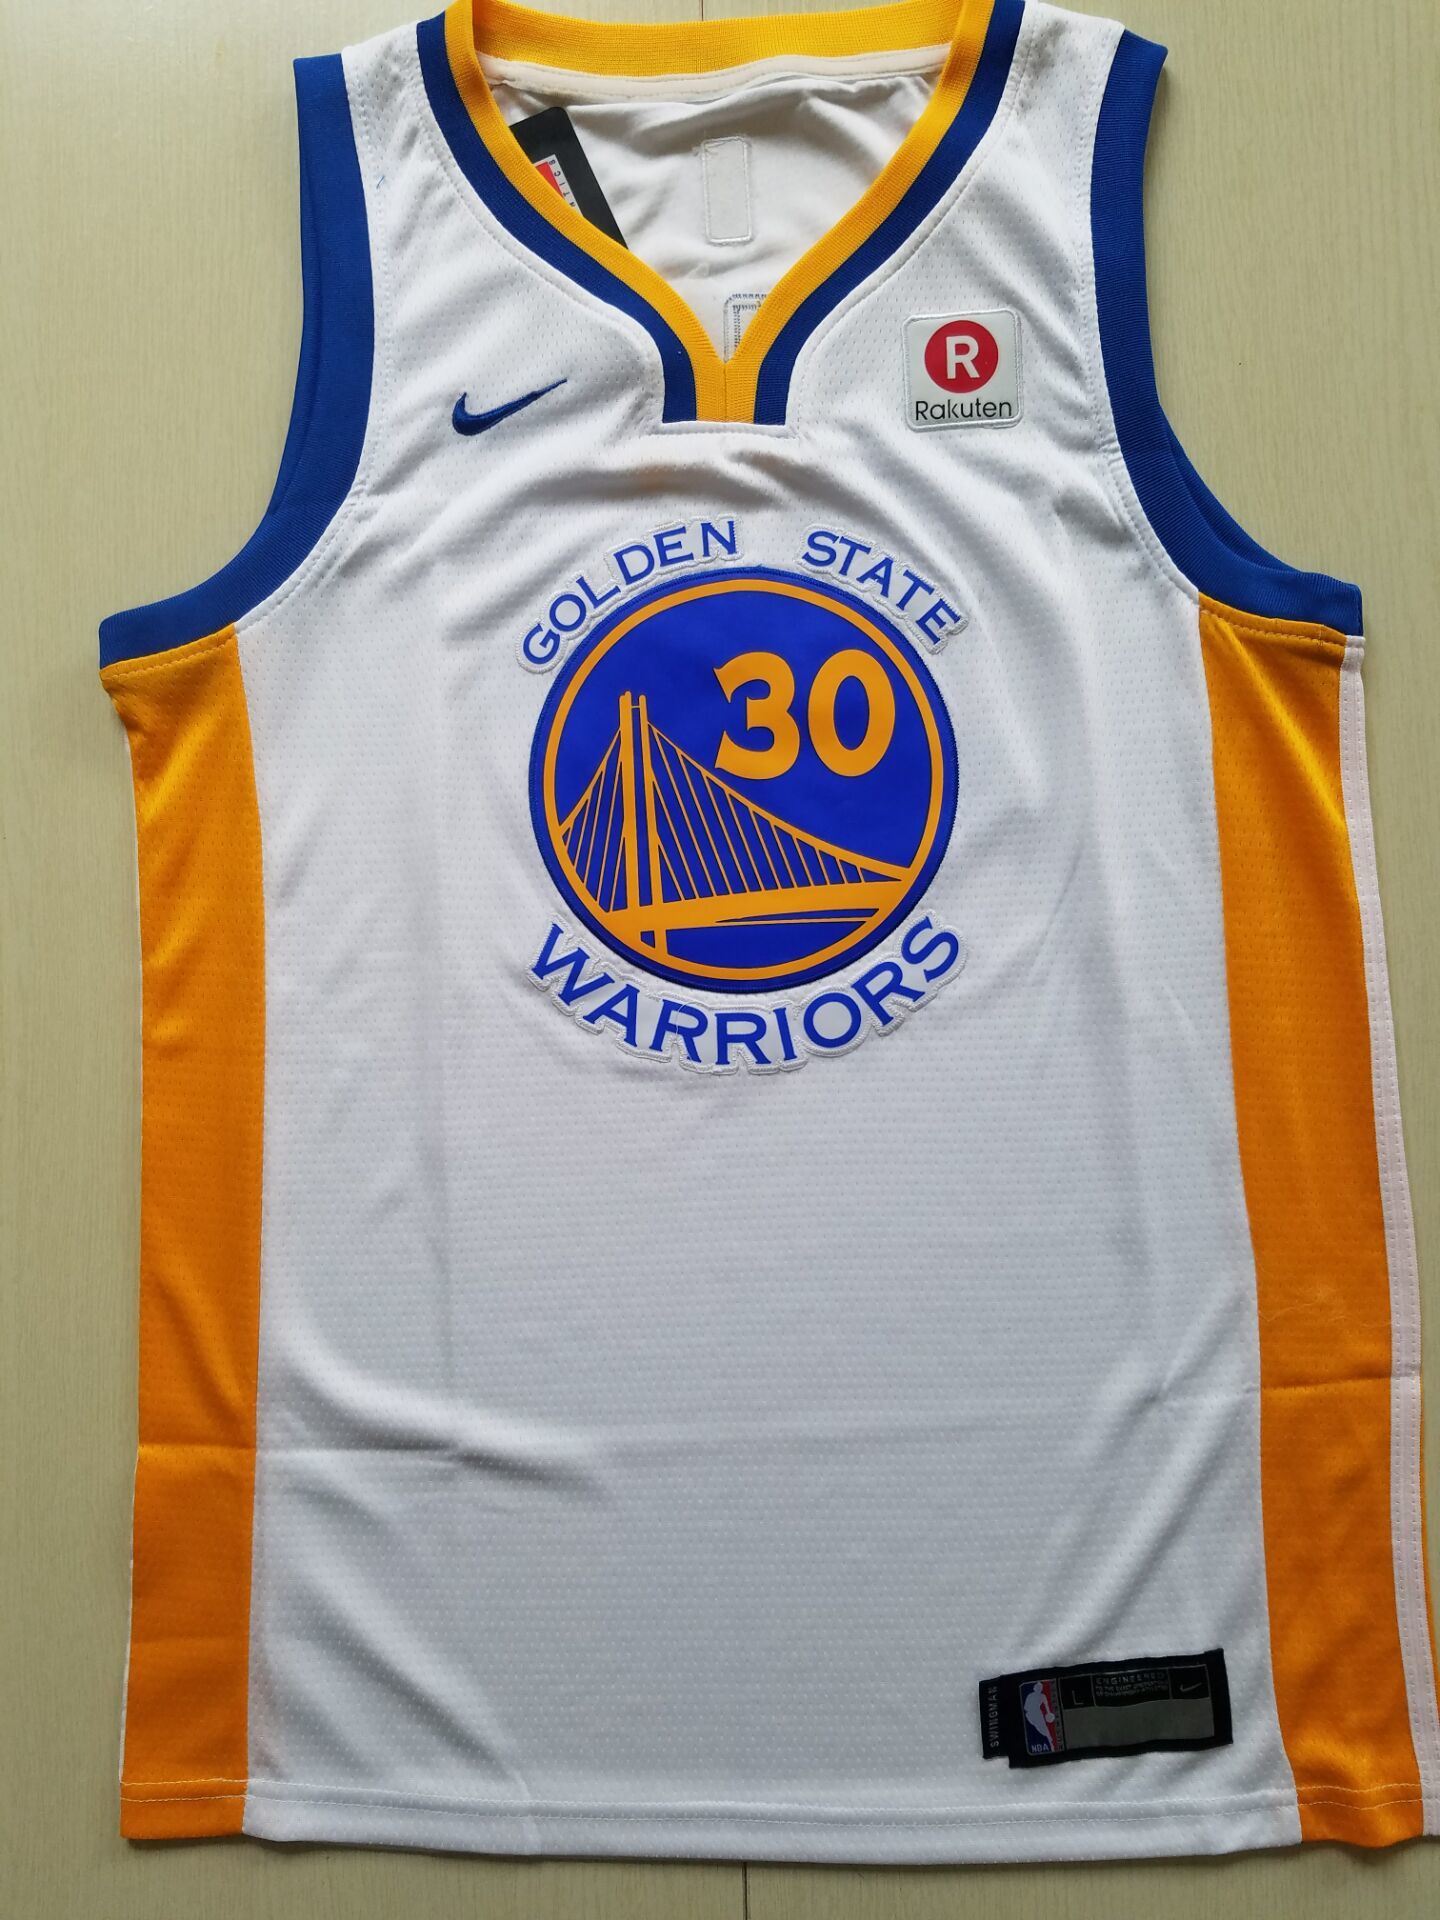 where can i find nba jerseys